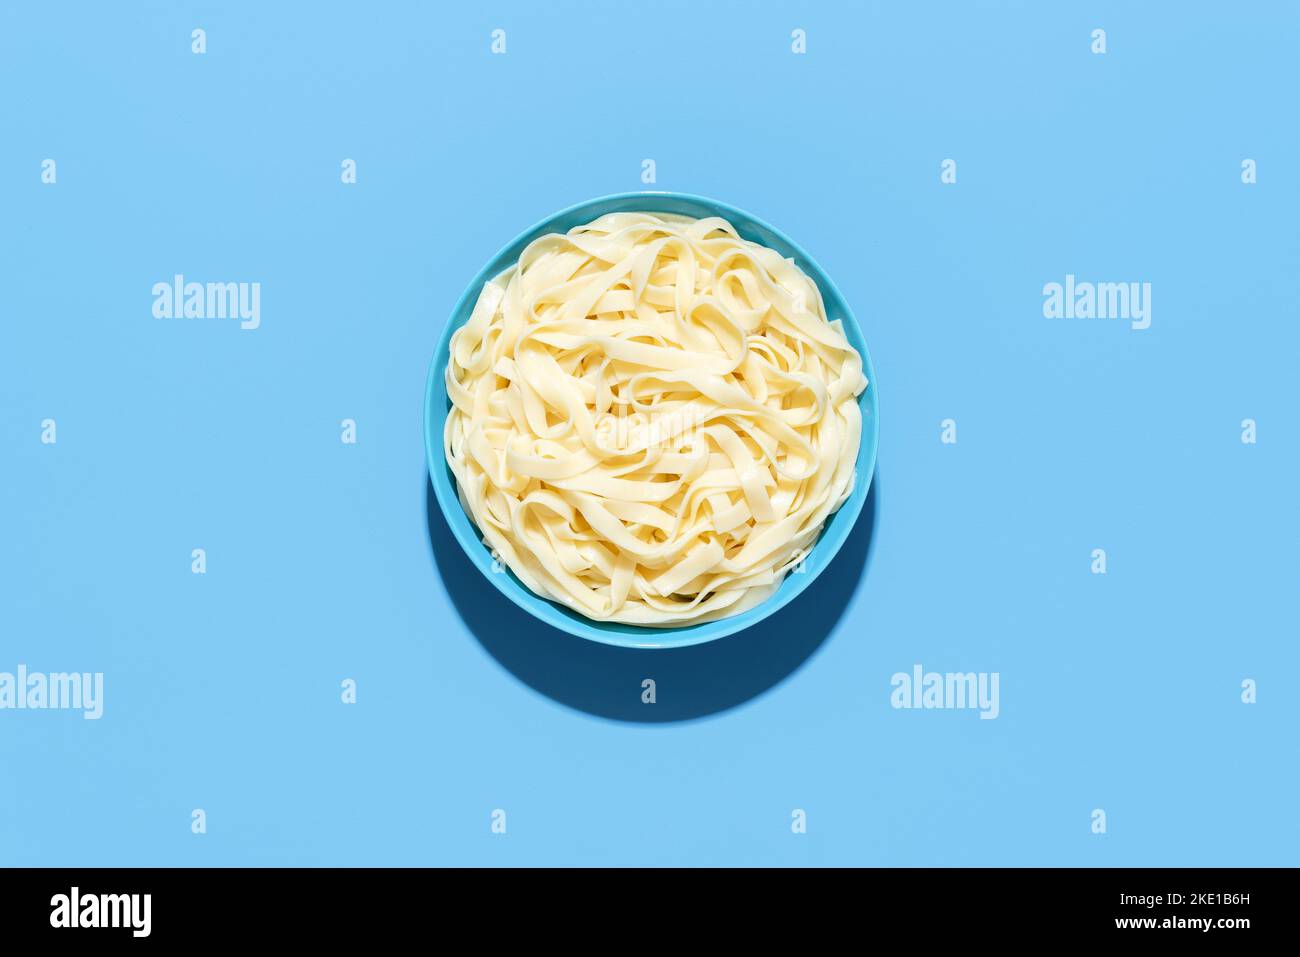 Above view with a bowl full of tagliatelle pasta, minimalist on a blue table. Boiled pasta without sauce in bright light on a colorful background Stock Photo